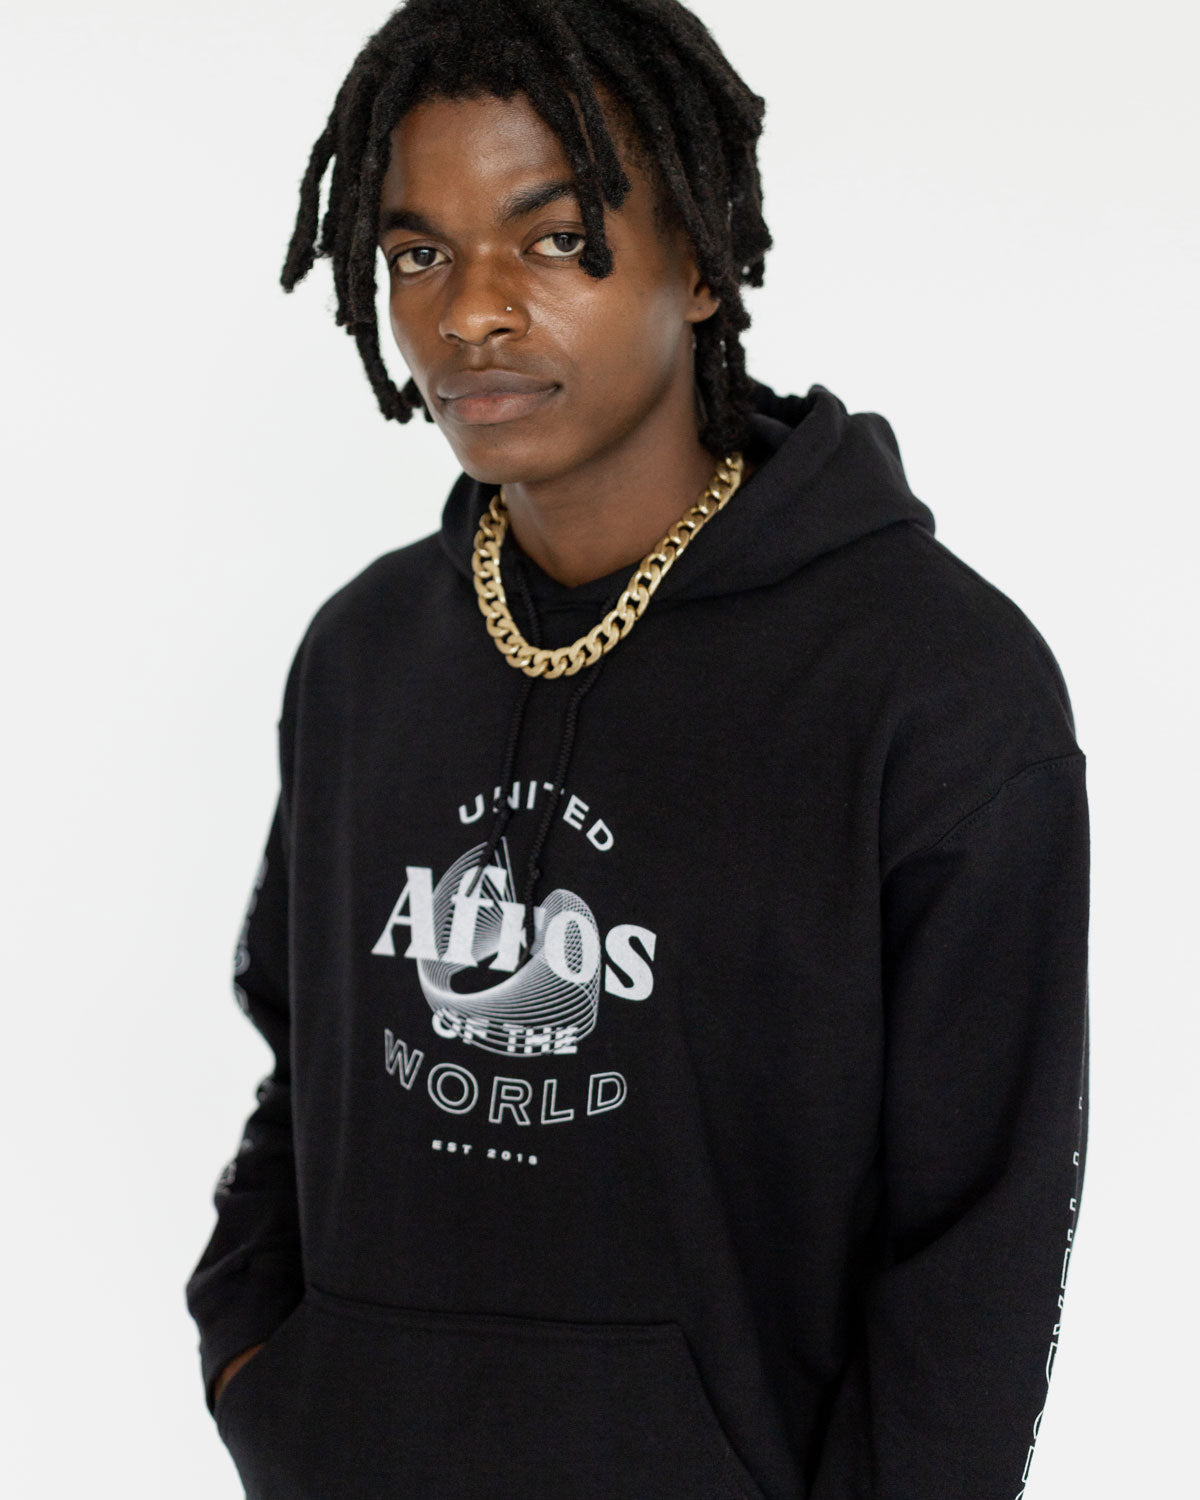 United Afros of the World Hoodie